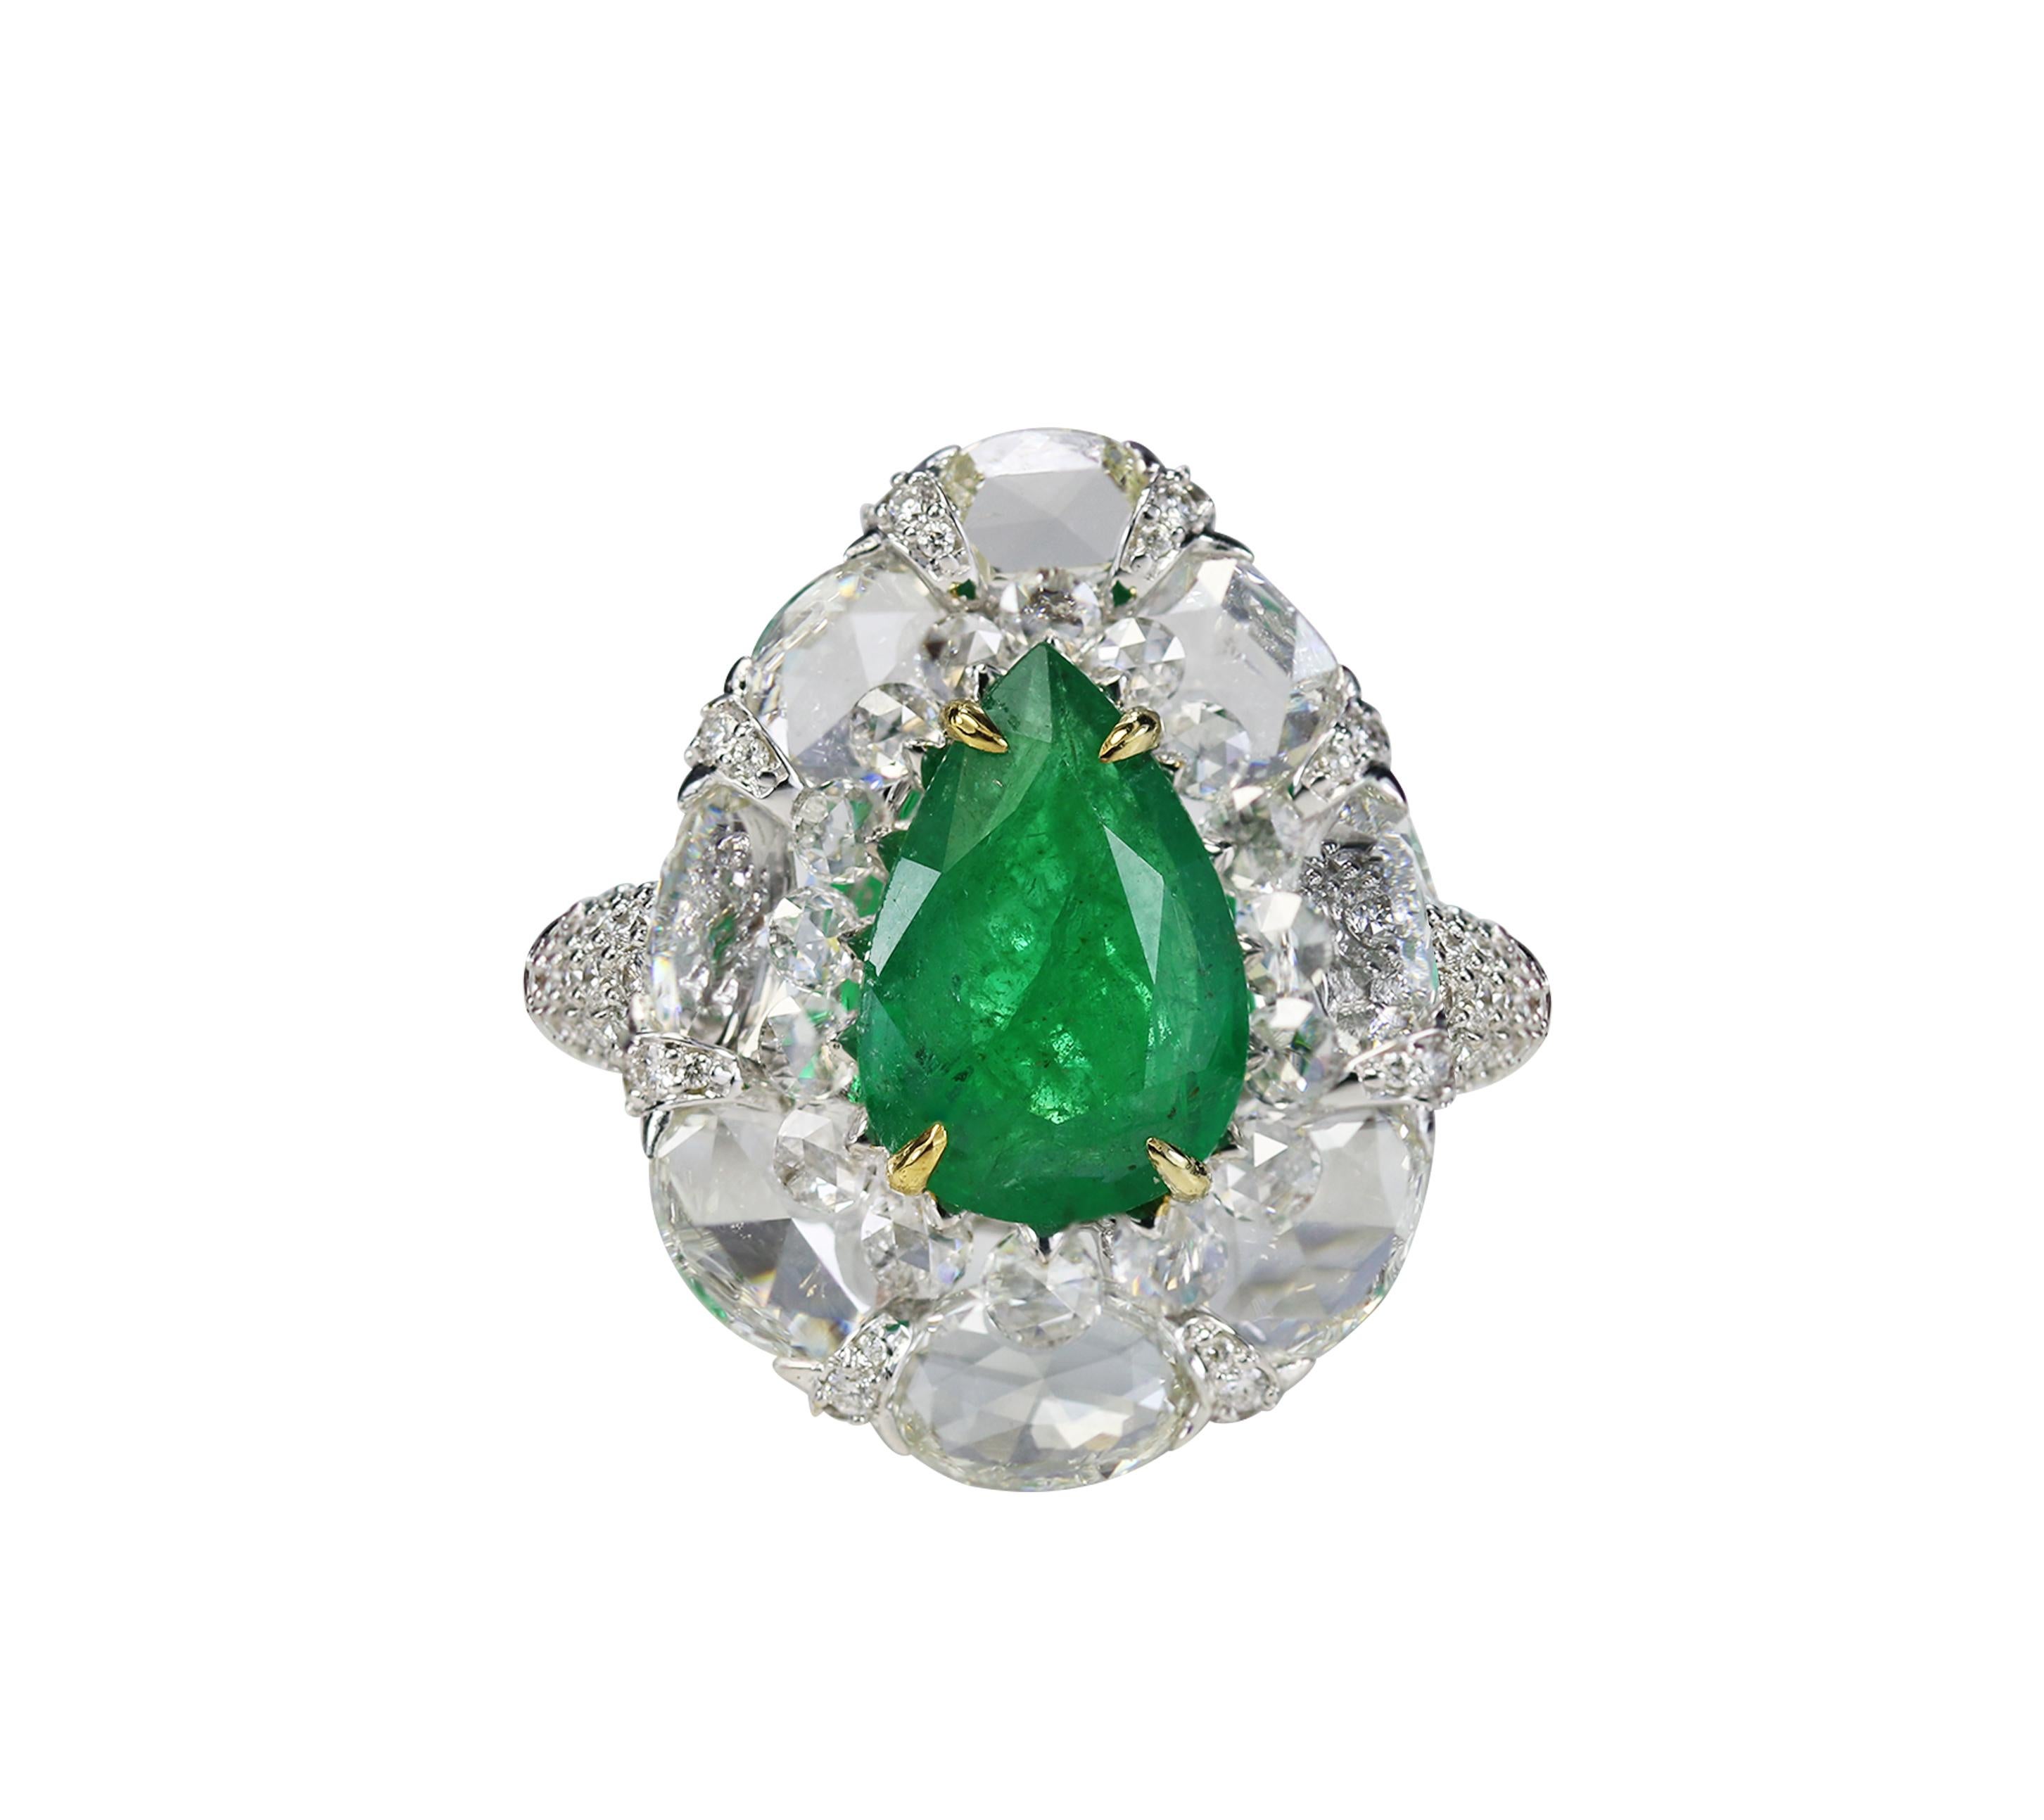 Diamond and emerald ring

Give your repertoire a glorious burst of colour with this 18K white gold ring adorned with round and oval rose cut and round brilliant cut diamonds and a drop-shaped emerald. Studded with 137 stones in a prong, drill and